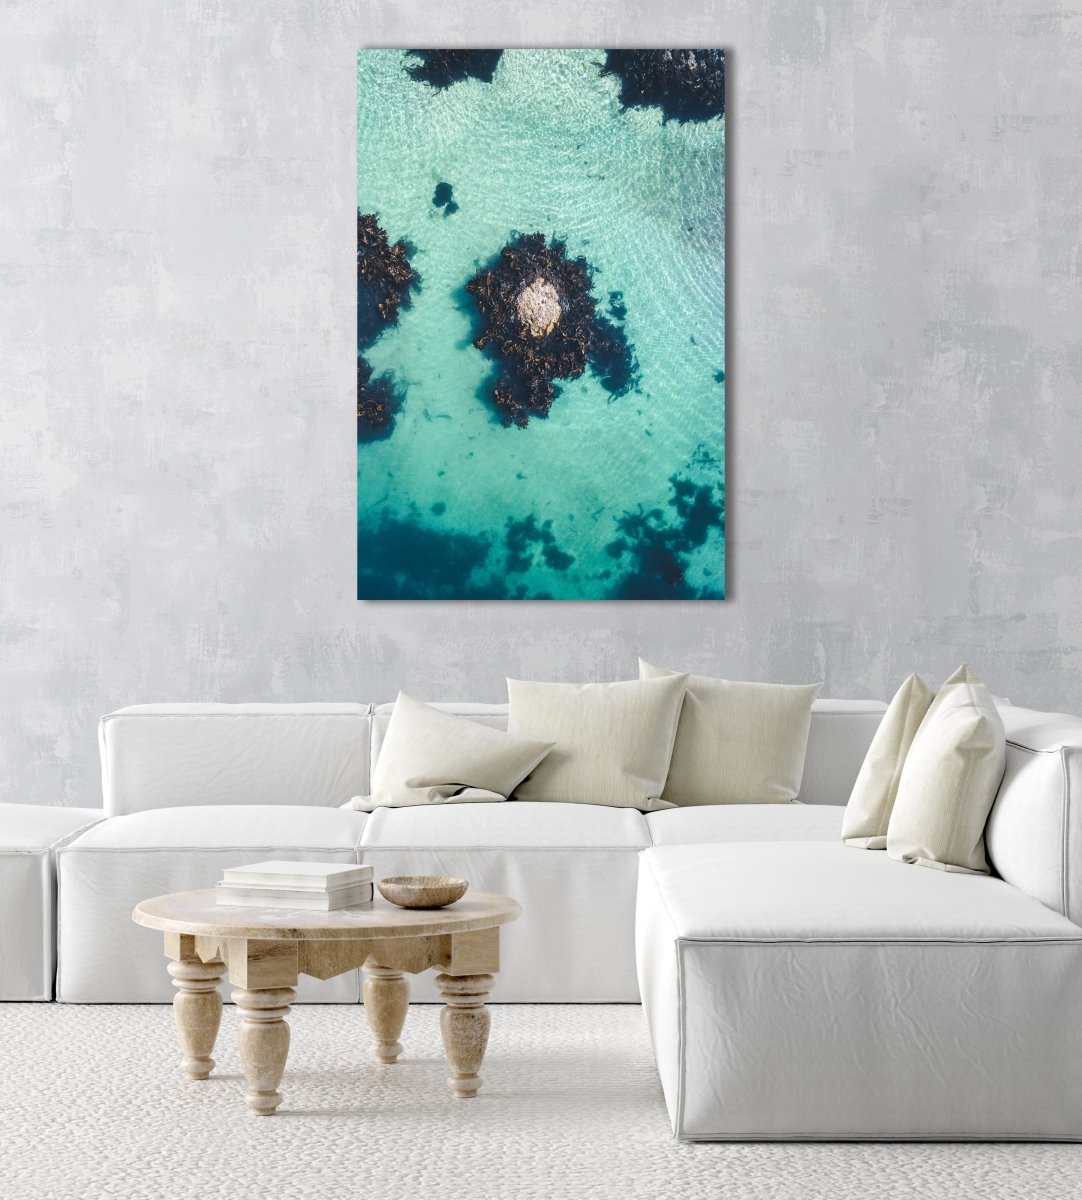 One rock with seaweed in middle of blue green water from above in a natural fine art frame